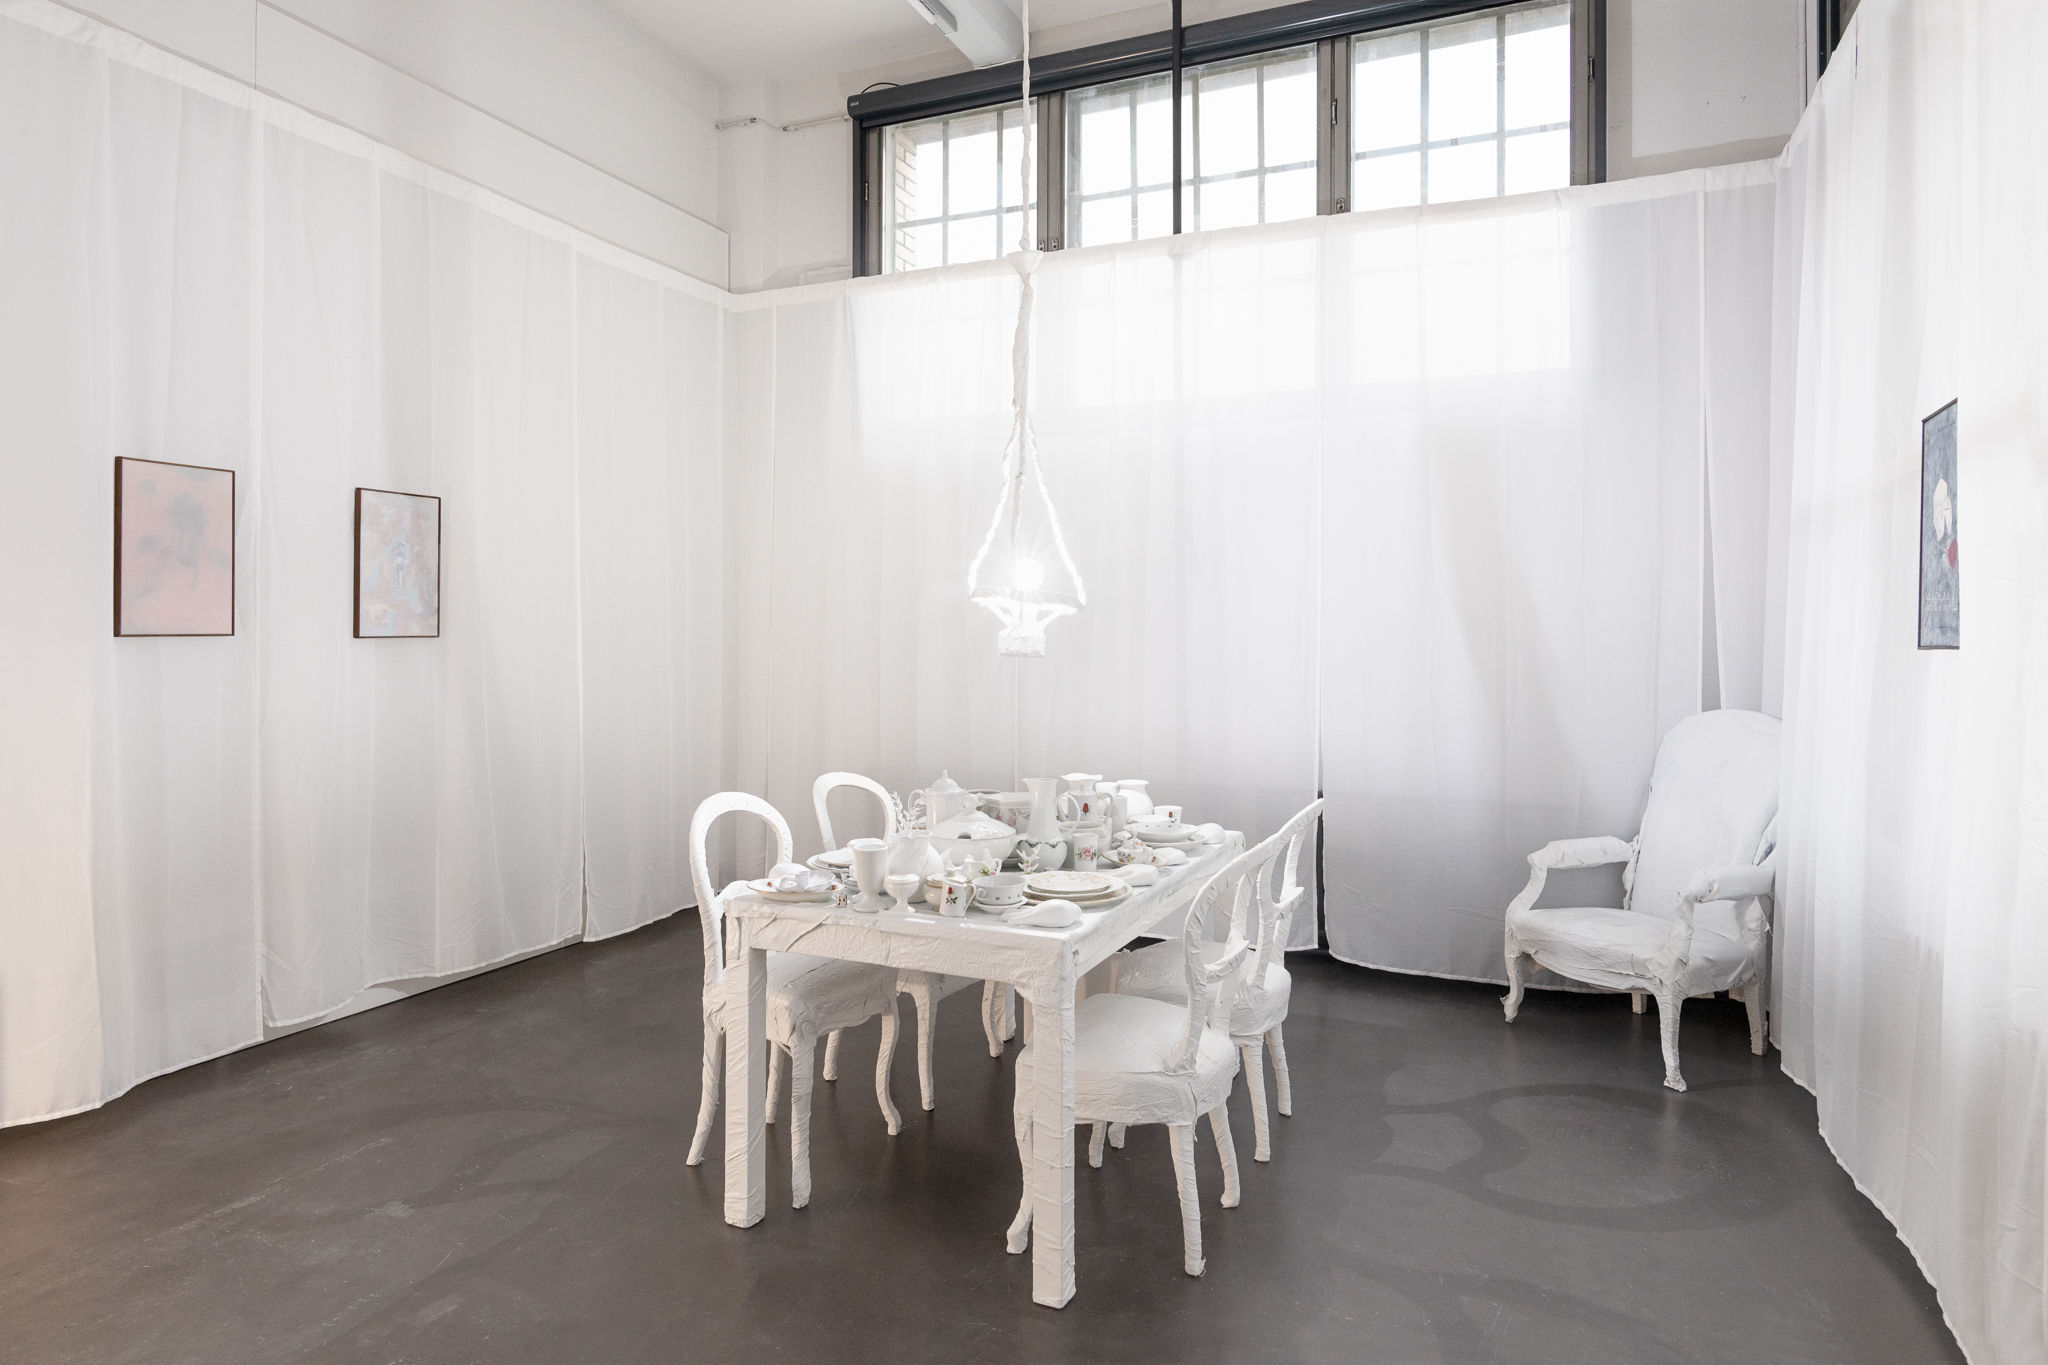 Sylvain Gelewski, Spieglein 2, installation, cotton curtains, lacquer on collected furniture wrapped into scrap canvas and textile, lacquer on collected objects and plaster, porcelain, text, sound, perfume, 300 x 500 x 500 cm, Sihl Delta, Zurich, 2024